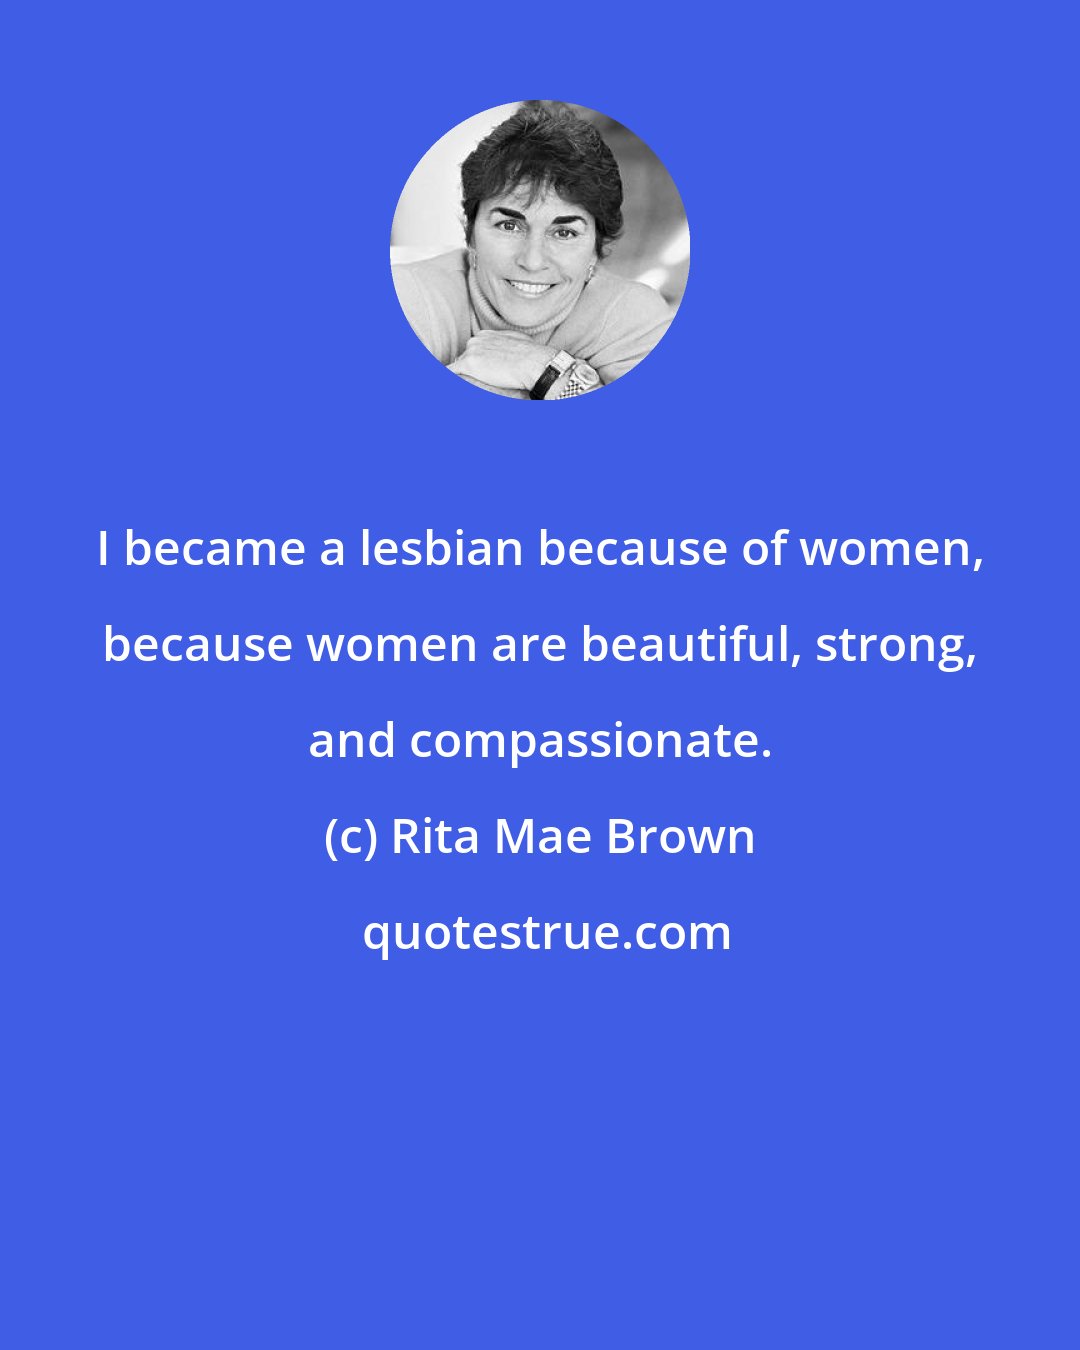 Rita Mae Brown: I became a lesbian because of women, because women are beautiful, strong, and compassionate.